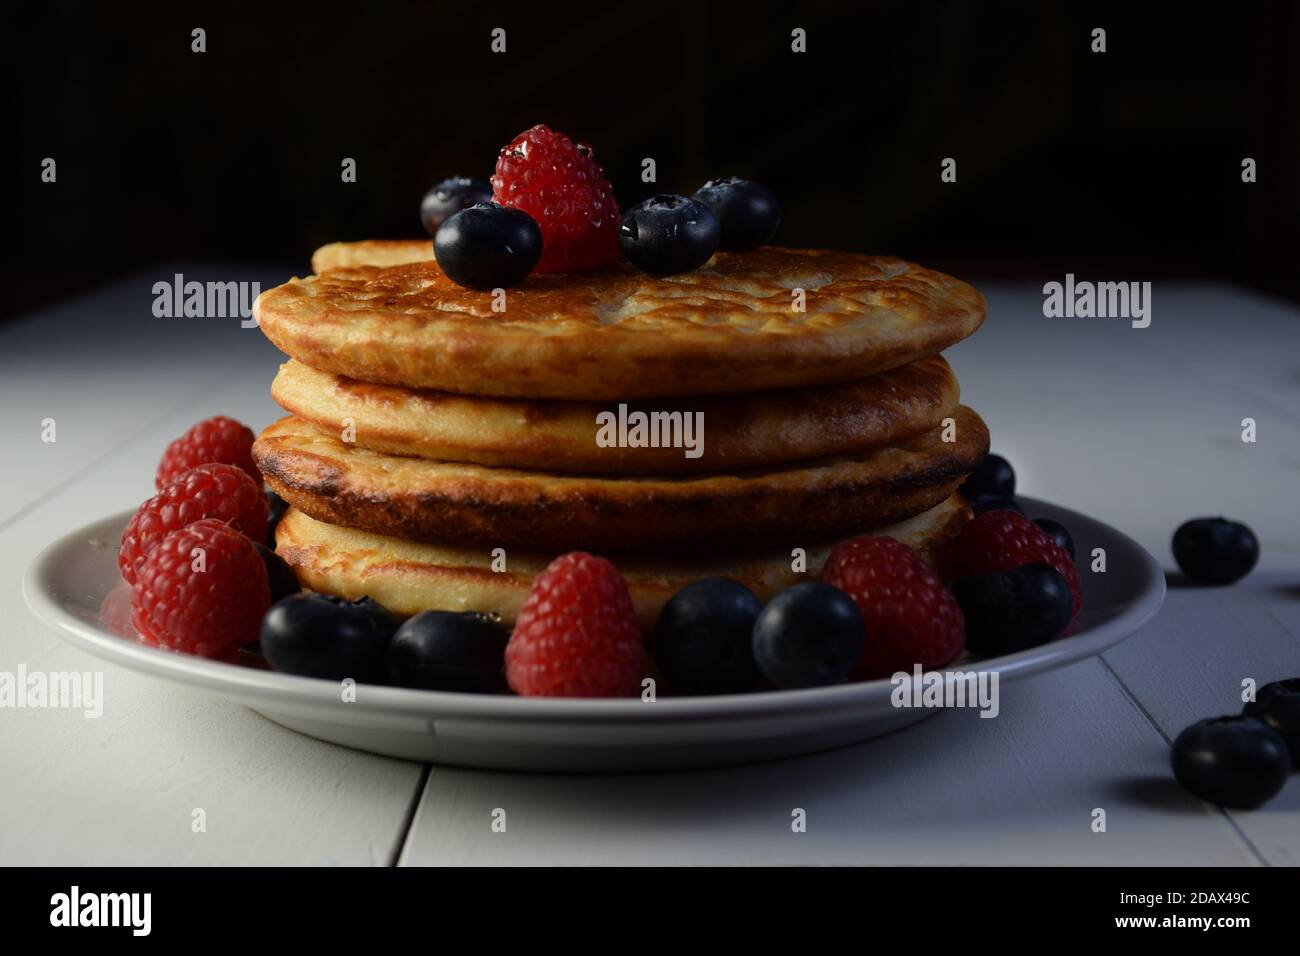 Plate of pancakes with maple syrup, blueberries and raspberries on white wooden table and black background. Stock Photo